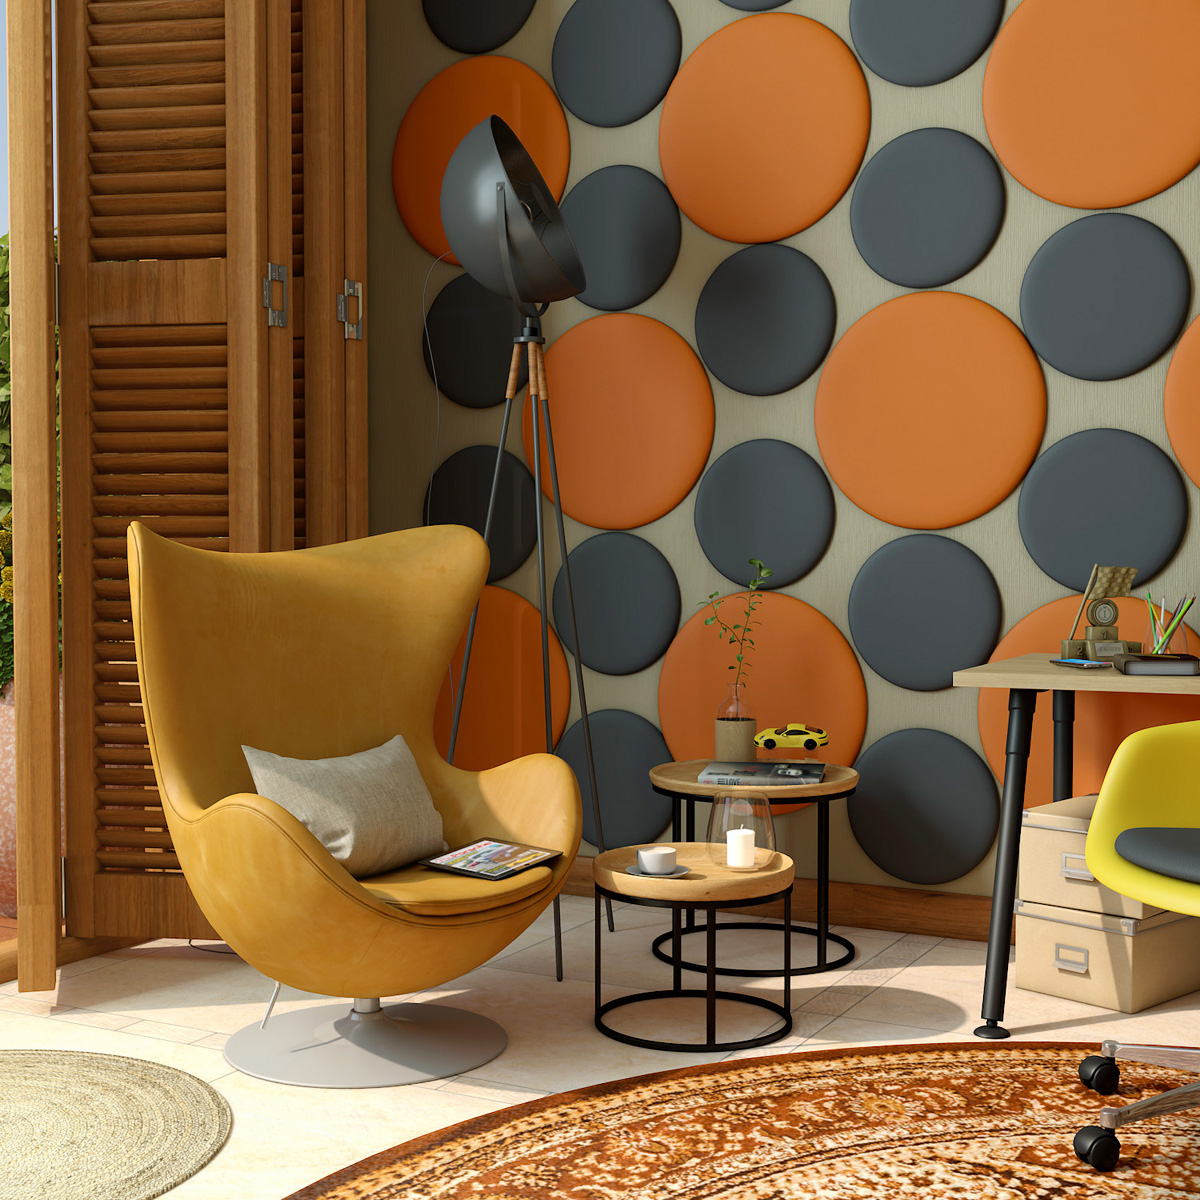 CARRERA™ Circular Acoustic Wall Panels Can Create Decorative Wall With Sound-Absorbing Qualities 